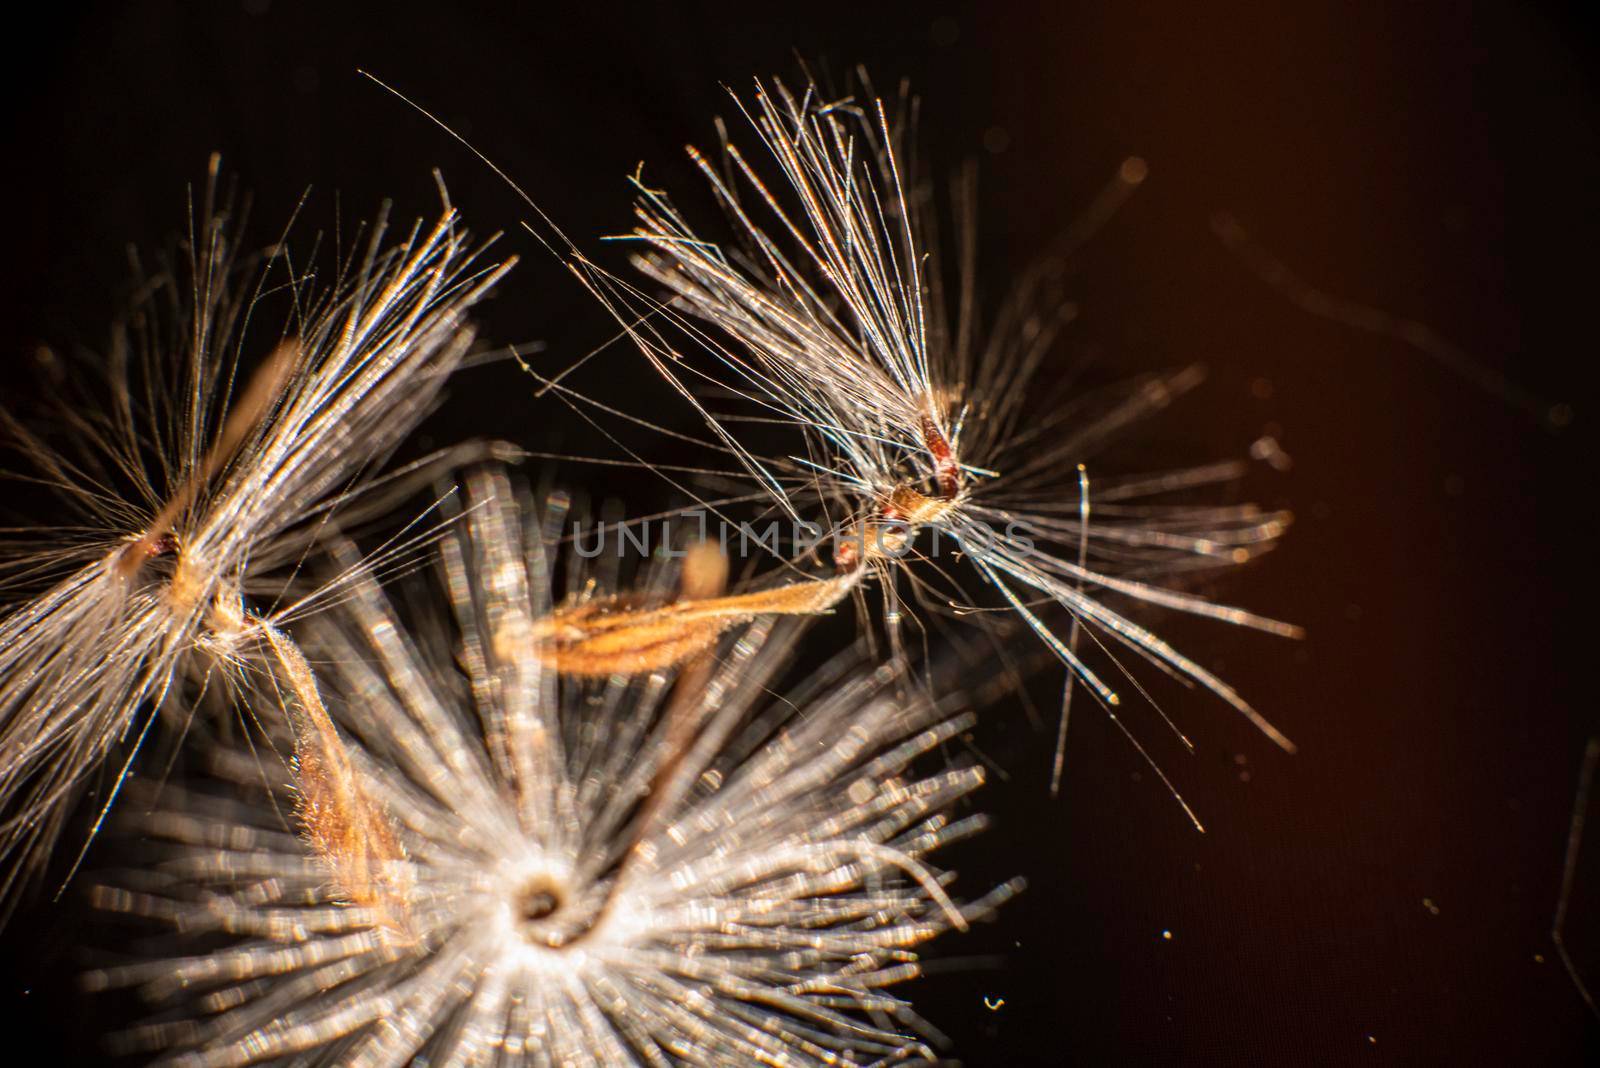 Brightly lit Pelargonium seeds, with fluffy hairs and a spiral body, are reflected in black perspex. Geranium seeds that look like ballerina ballet dancers. Motes of dust shine in the background like a constellation of stars by avirozen